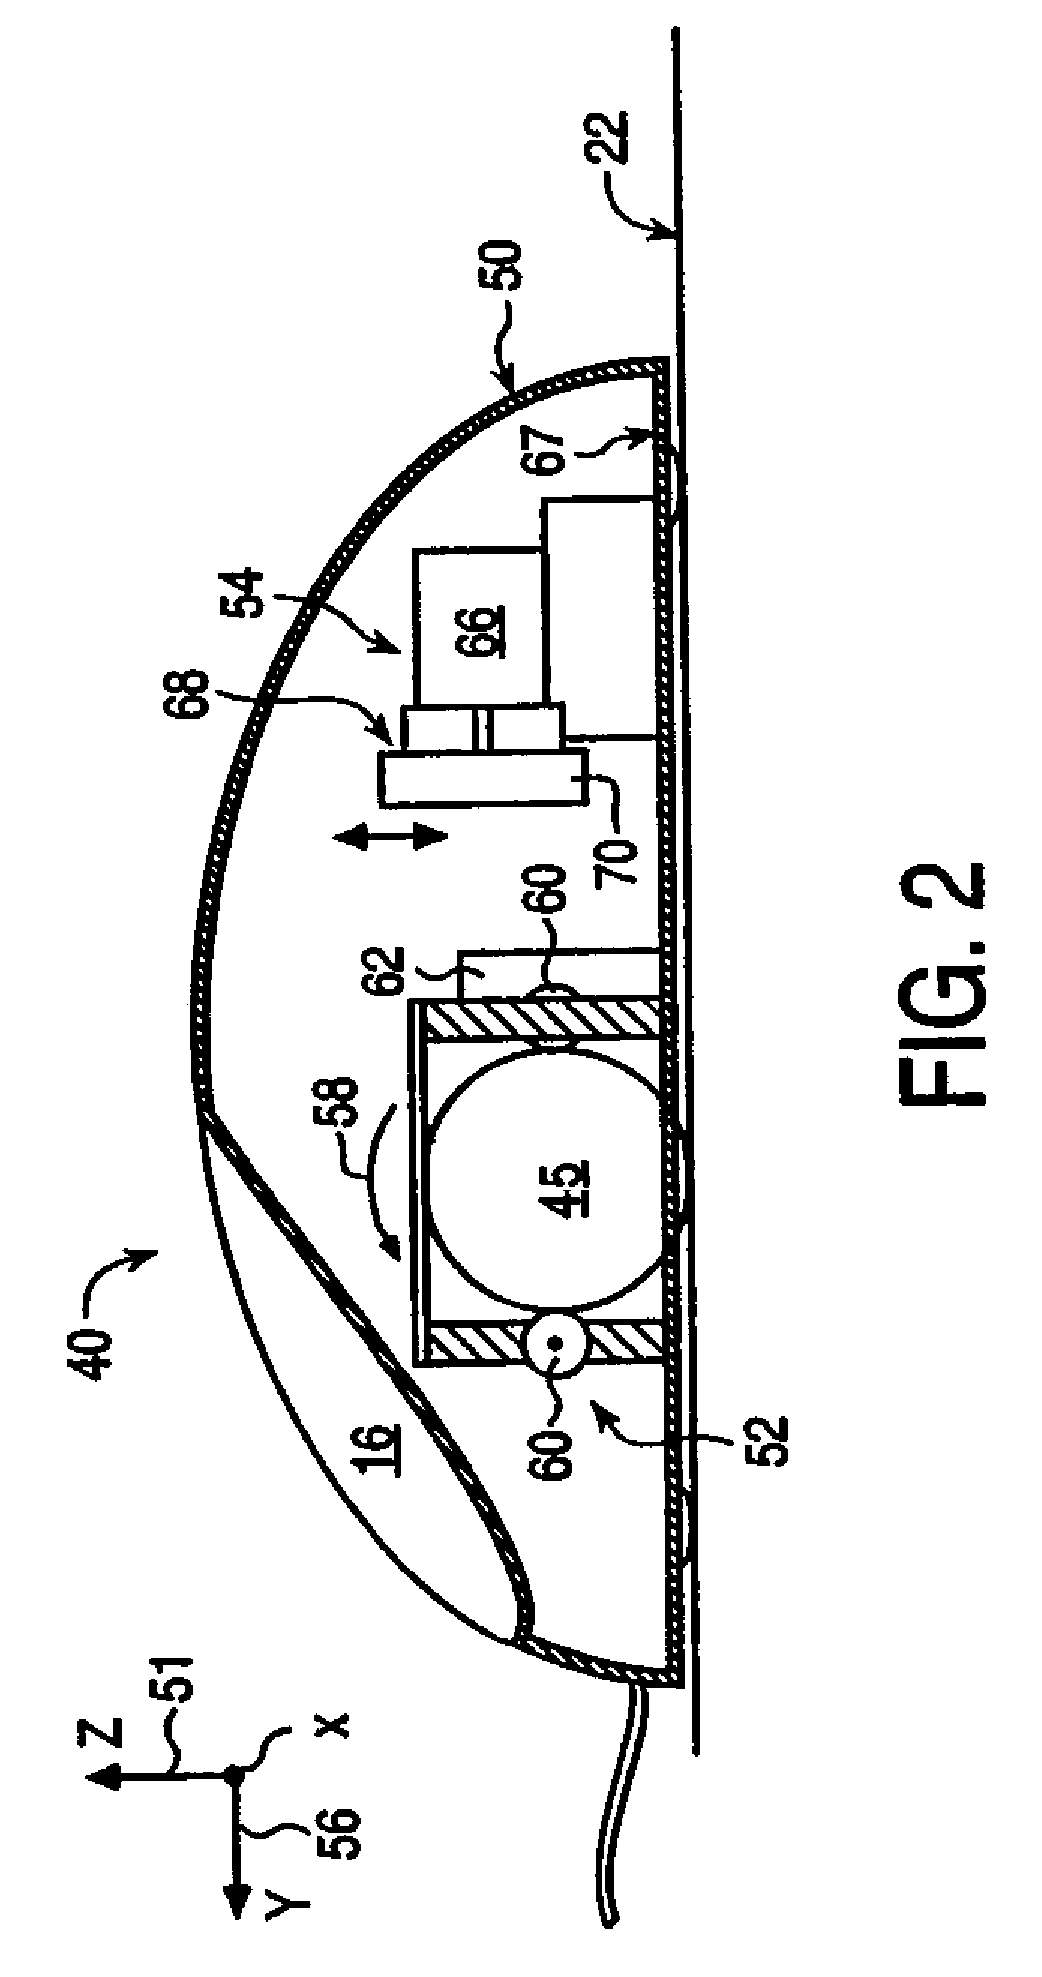 Haptic Interface Device and Actuator Assembly Providing Linear Haptic Sensations